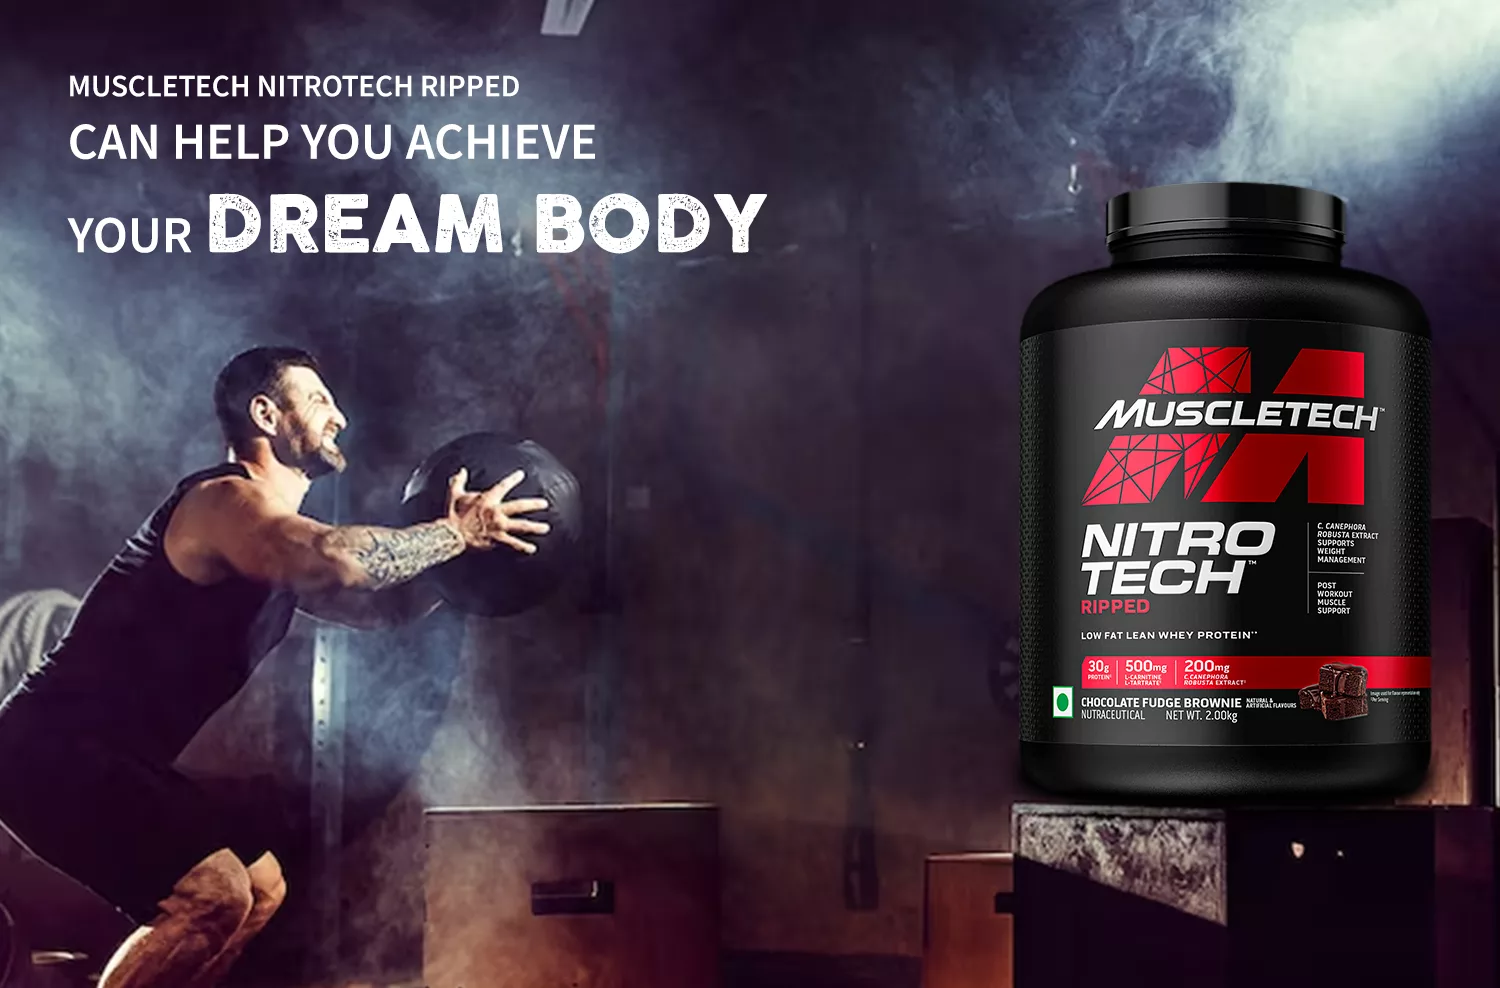 How MuscleTech NitroTech Ripped Can Help You Achieve Your Dream Body